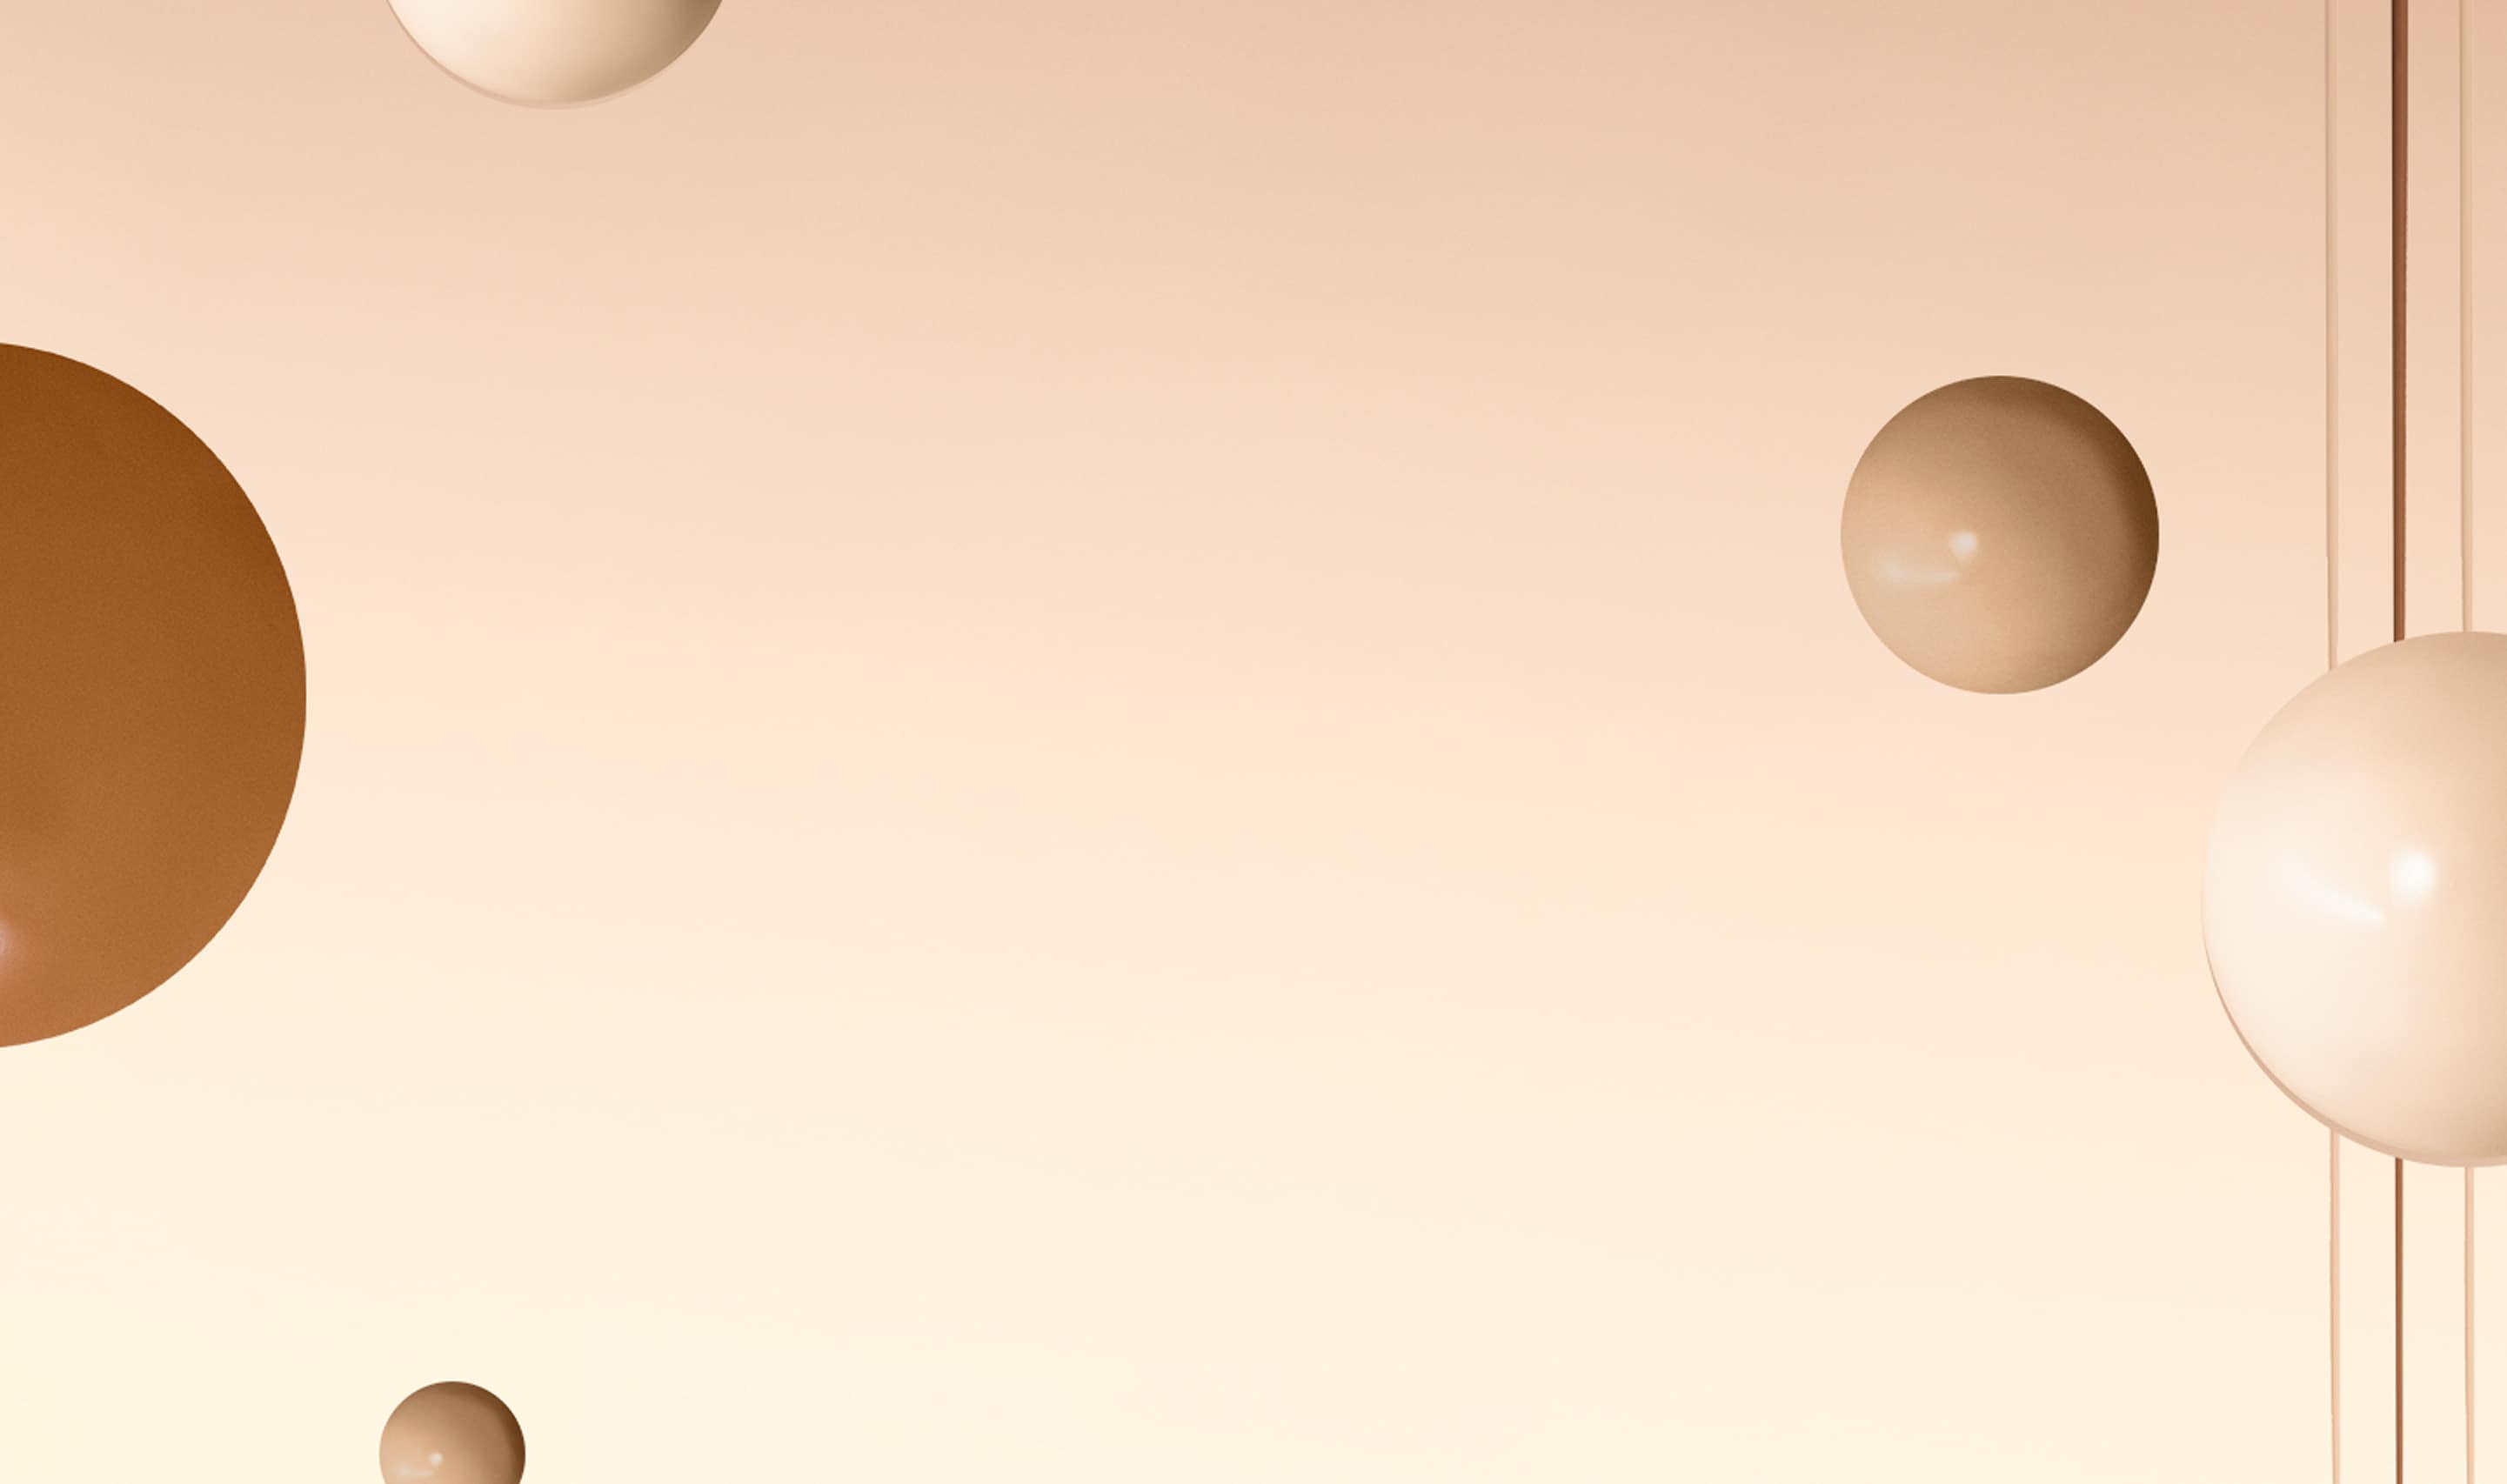 Background image containing skin-toned gradient with Vitamin Enriched Skin Tint foundation spheres floating